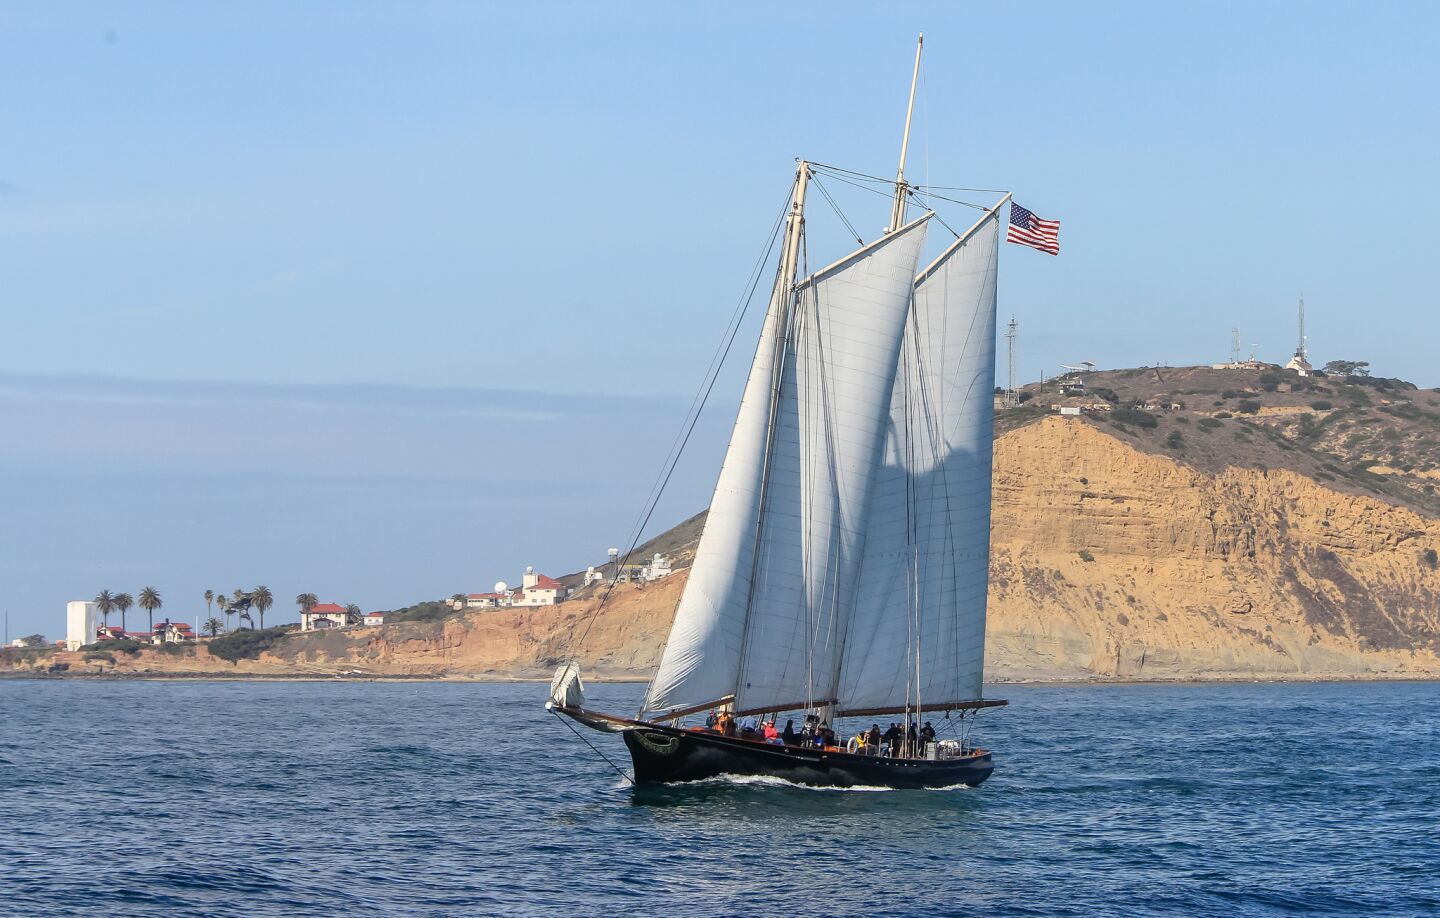 With Point Loma in the background, the yacht America leaves San Diego bay on a sailing tour.